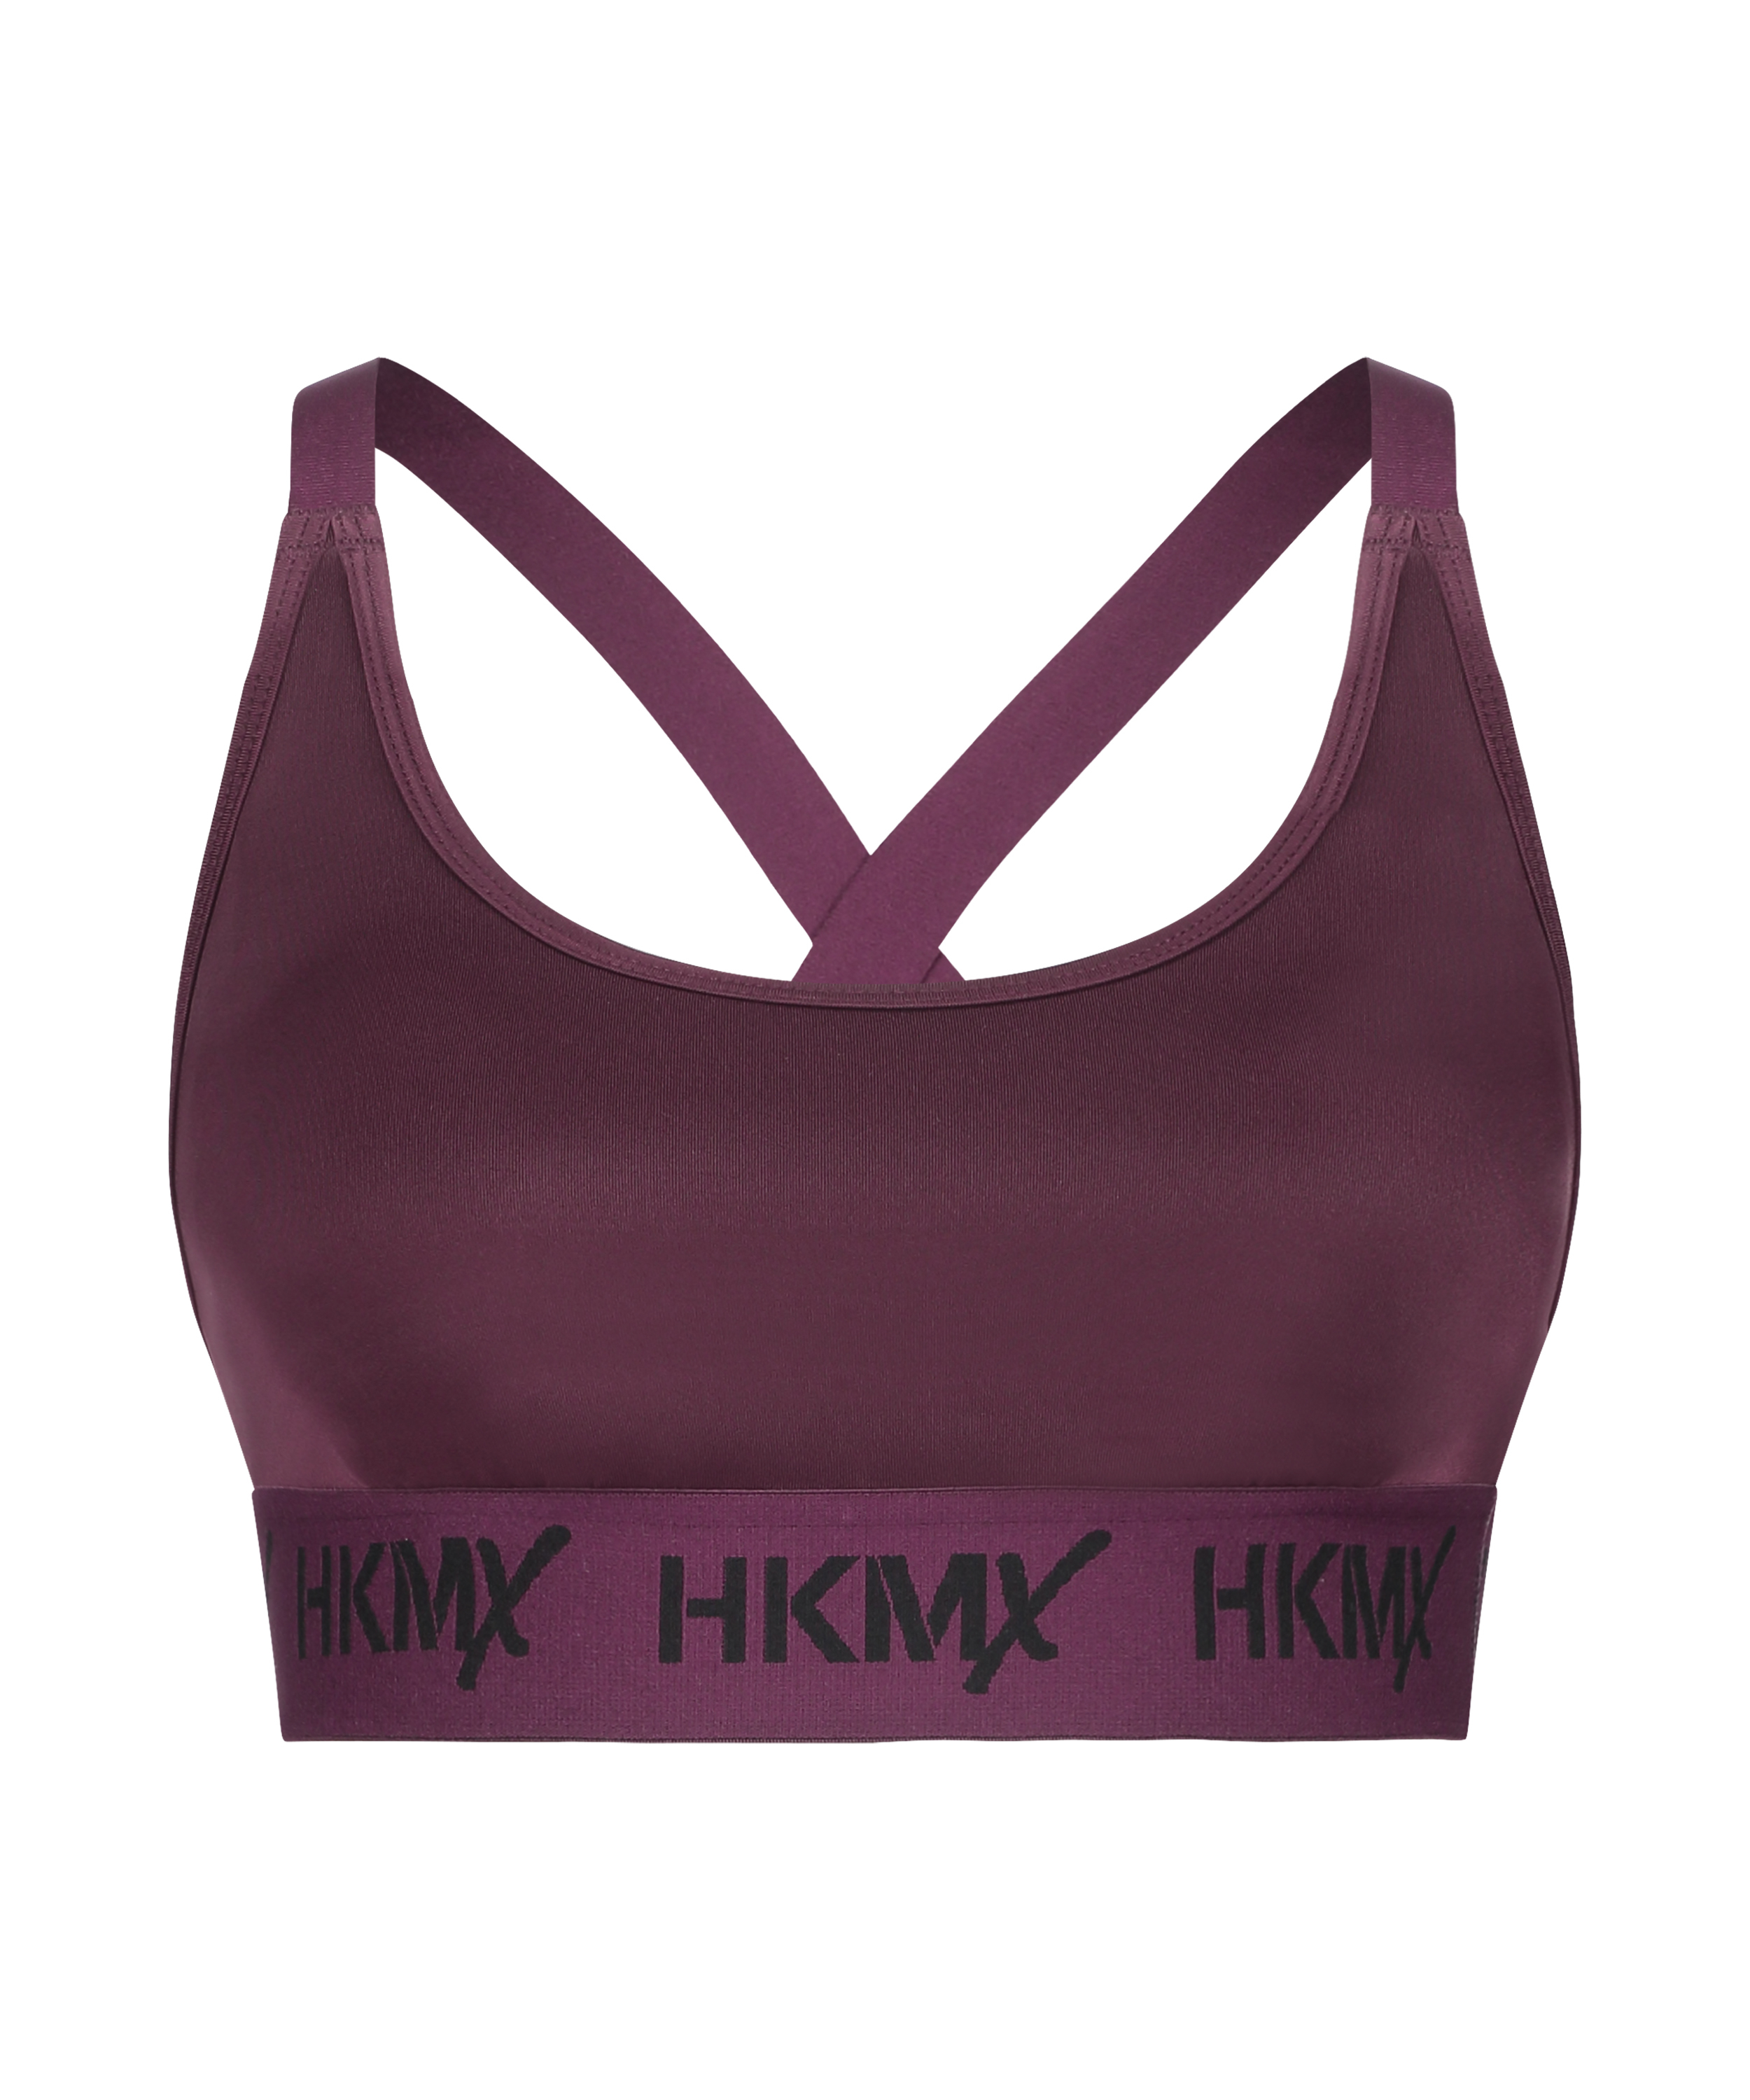 HKMX sport bh The Crop Logo Level 1, Paars, main